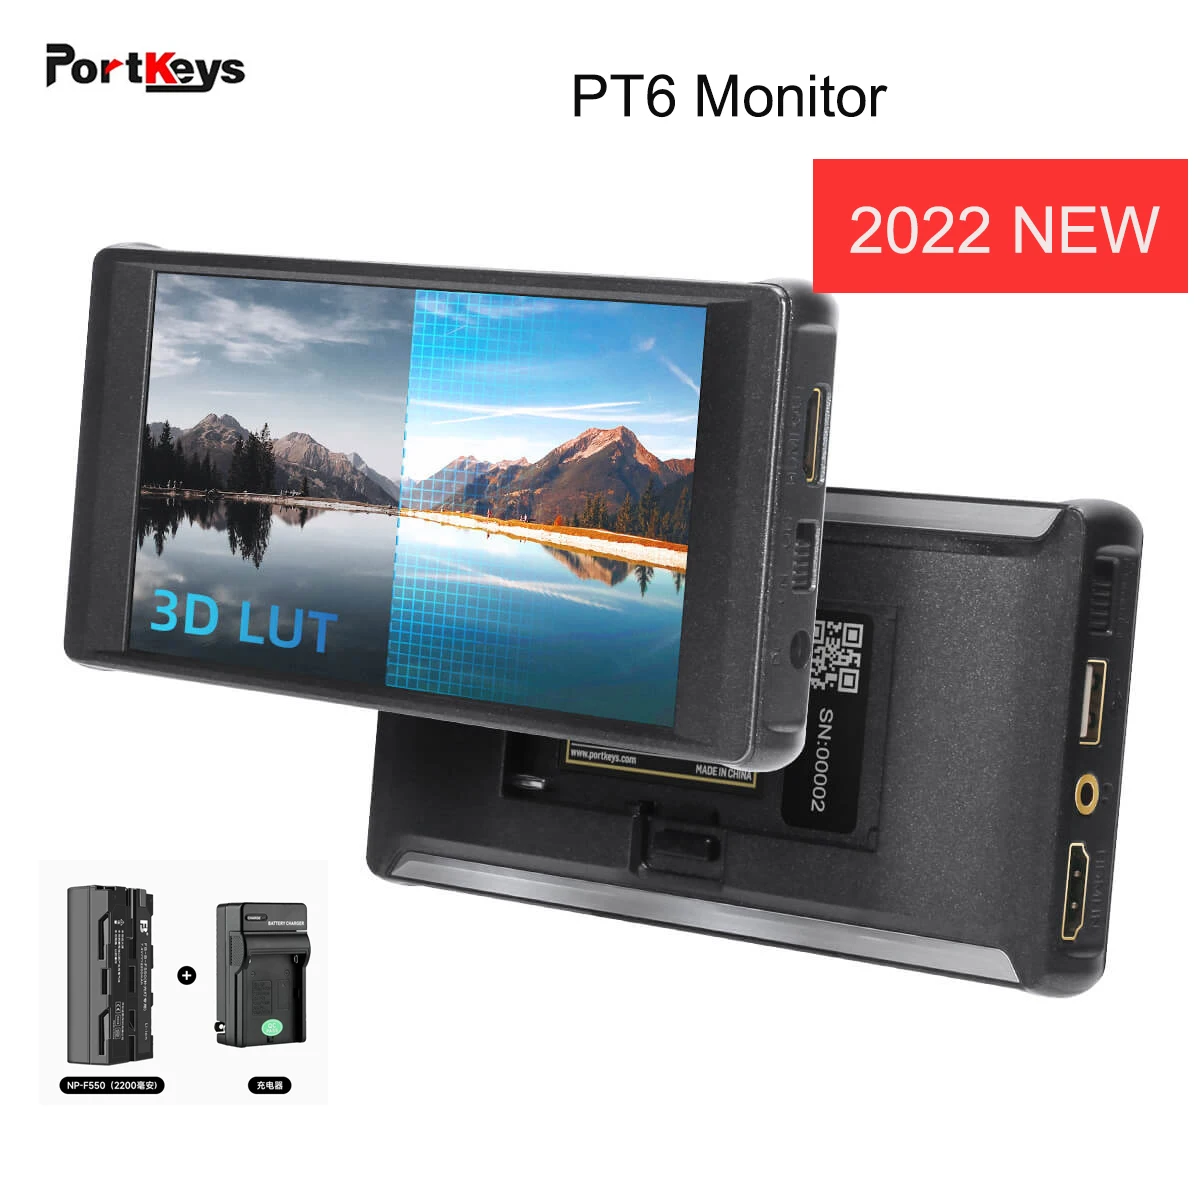 

Portkeys PT6 Monitor 5.2inch 600nit Portable Field Monitor 4K 30p 3D LUT Support 600nit for Camera DSLR for Live